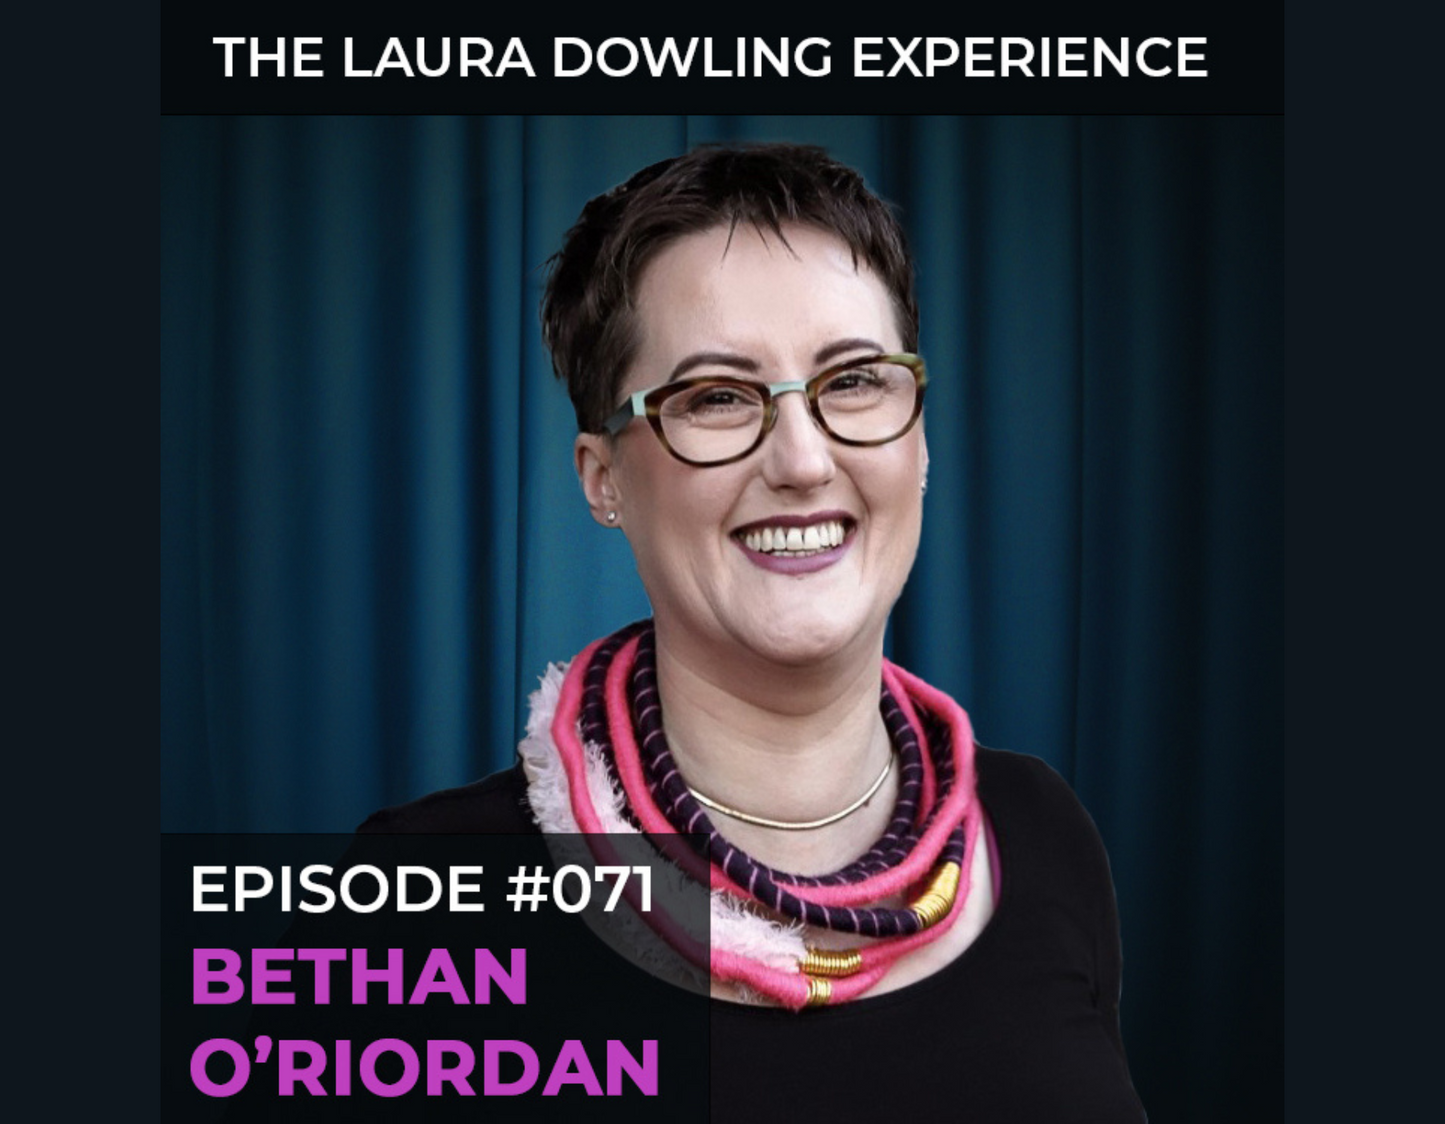 Talking to teenagers and effective parenting, with Bethan O'Riordan, pyschotherapist, #71 The Laura Dowling Experience podcast